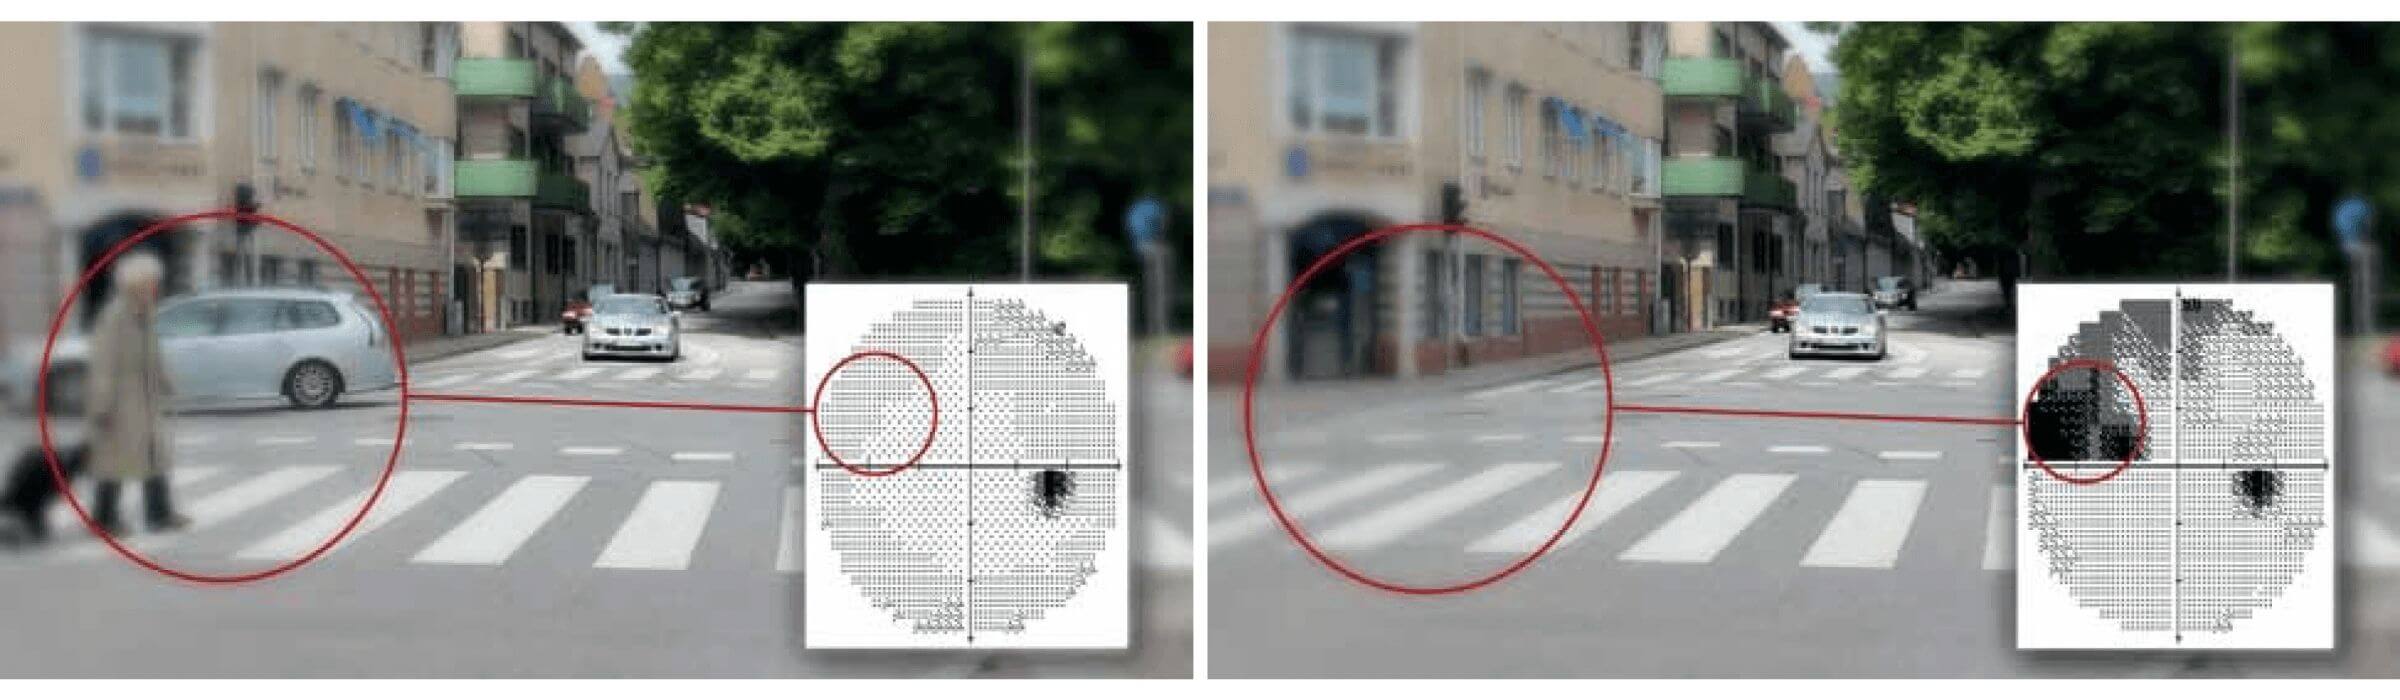 Side-by-side images one showing a person crossing a pedestrian crossing the other showing the filling-in-effect caused by glaucomatous visual field loss. On the second image you can see the pedestrian crossing but not the person crossing it.